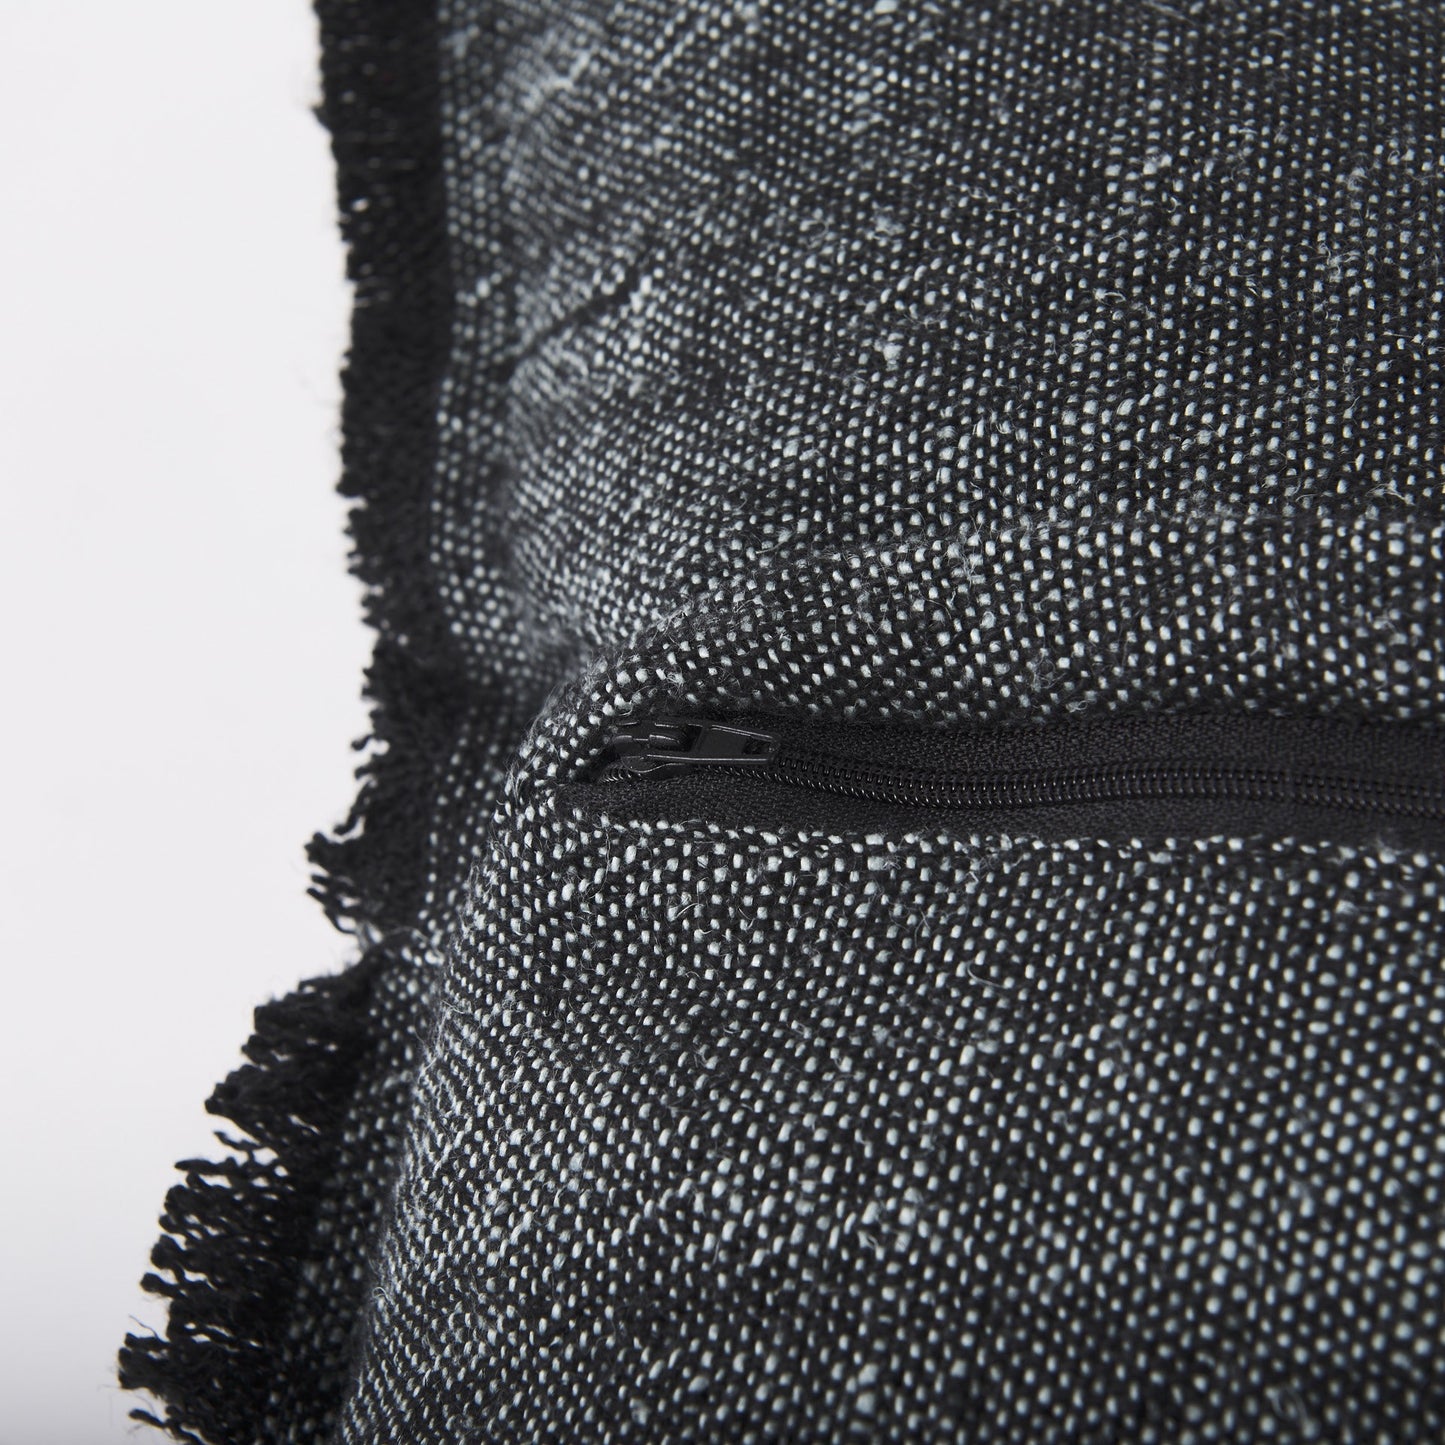 Dark Gray Fringed Throw Pillow Cover